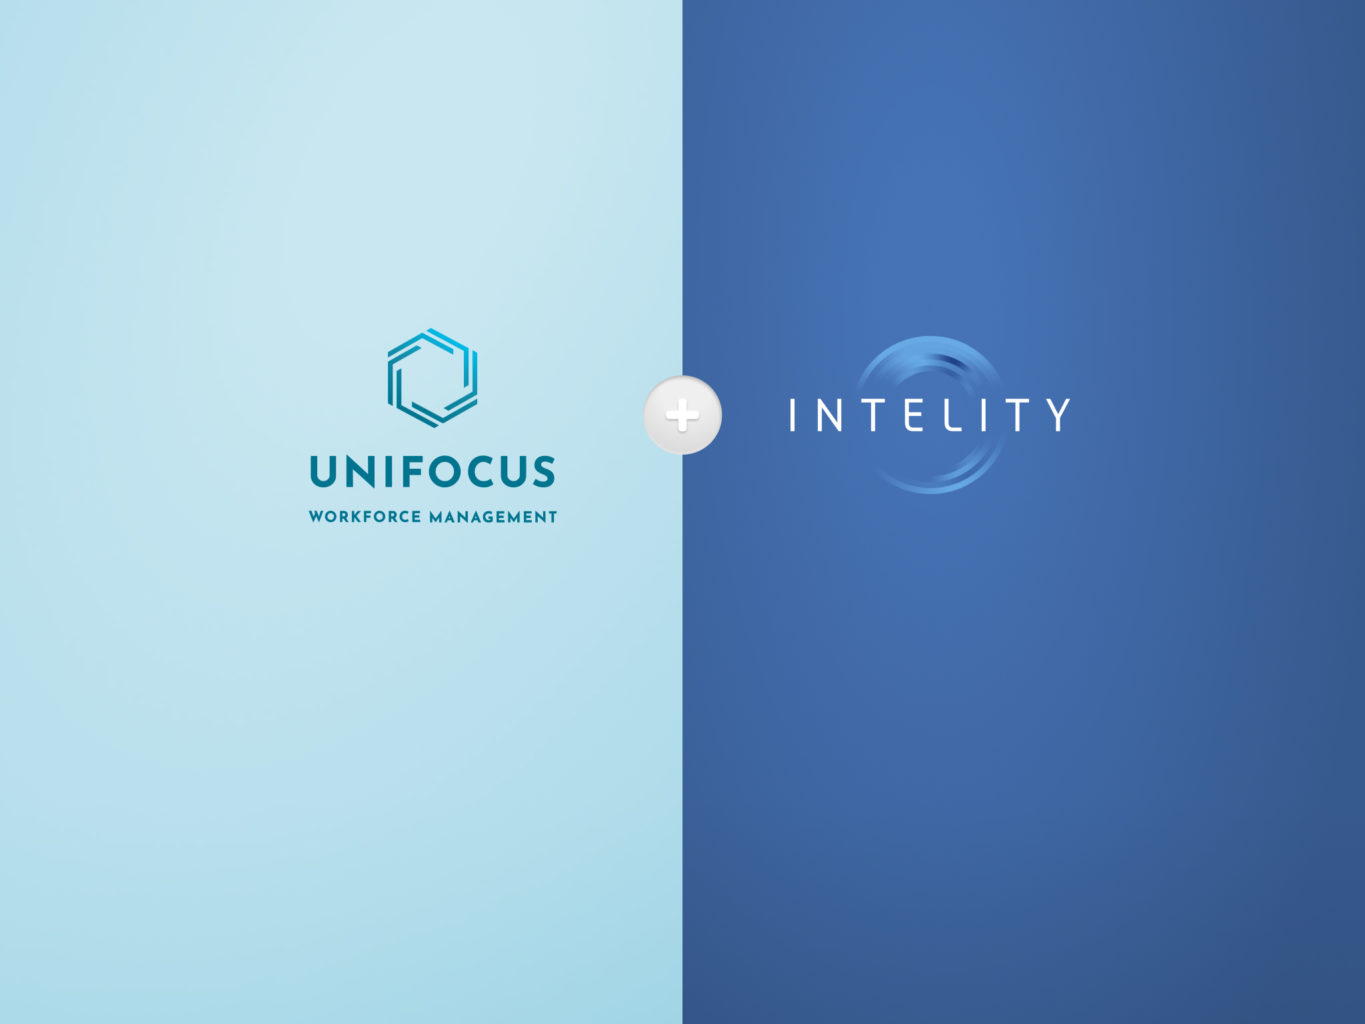 INTELITY Announces Updated Strategic Partnership with Unifocus, formerly Knowcross Header Image